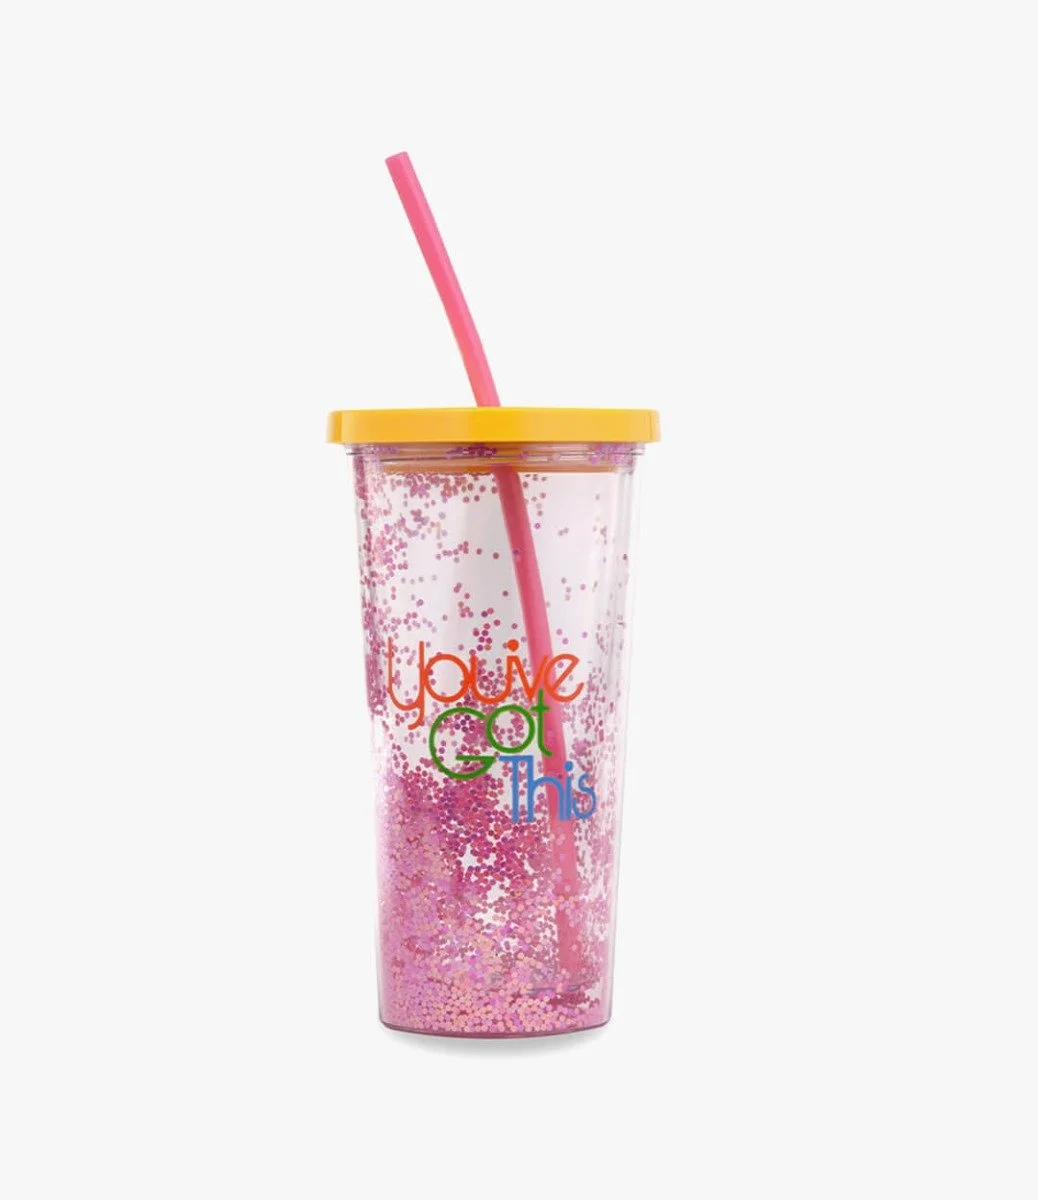 Glitter Bomb Sip Sip Tumbler with Straw, You've Got This by Ban.do